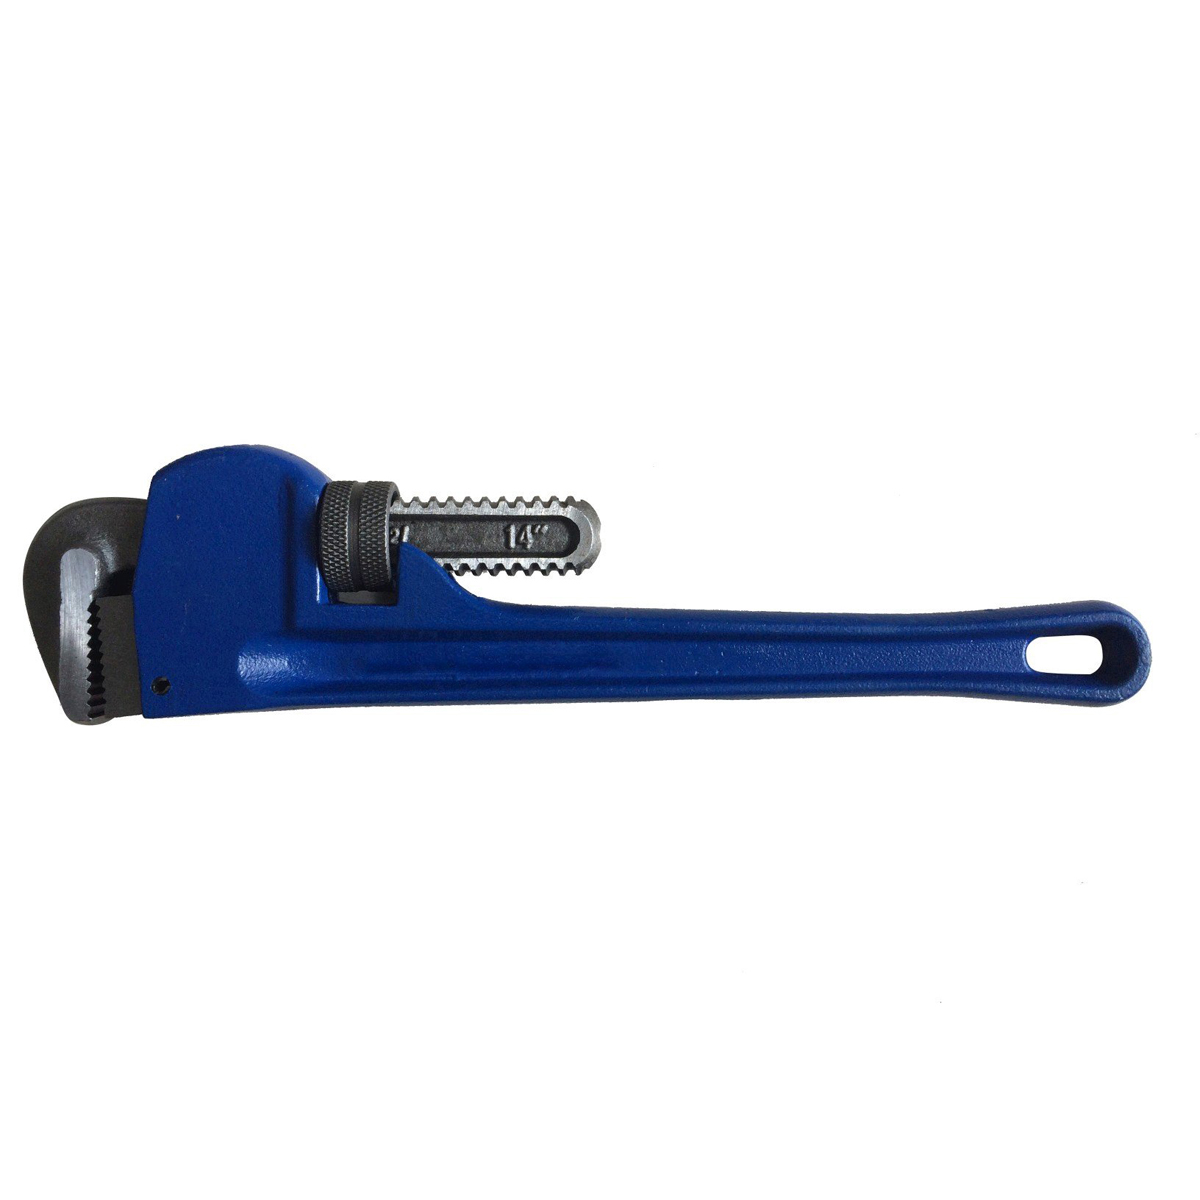 Kenyon 41604 24 Steel Pipe Wrench Seymour Midwest 